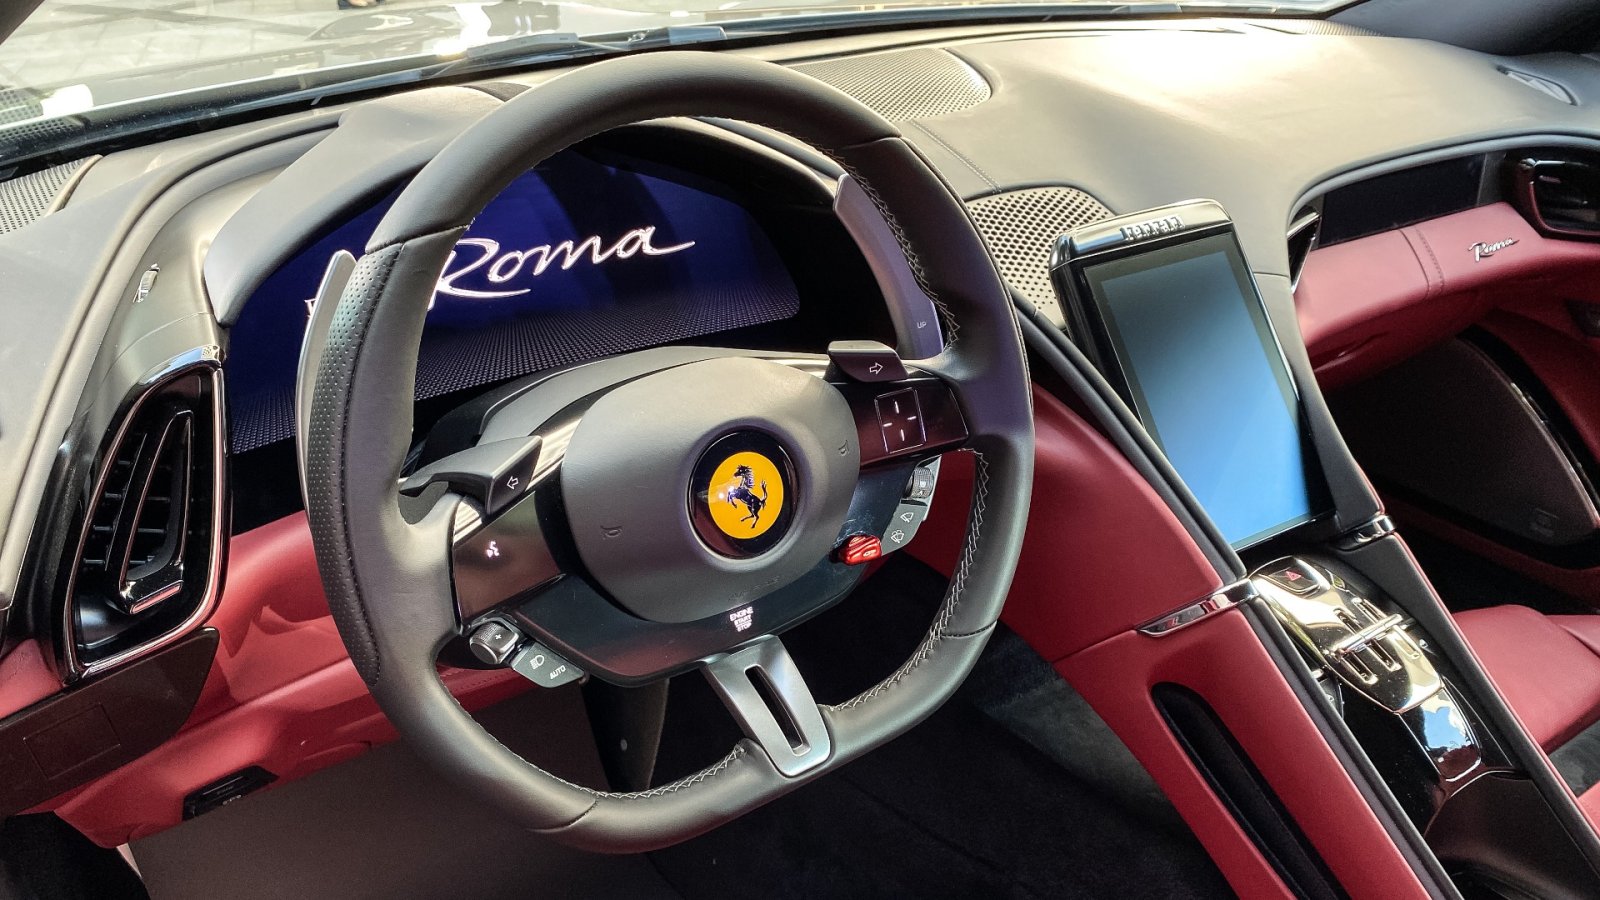 Everything you need to know about the new Ferrari Roma